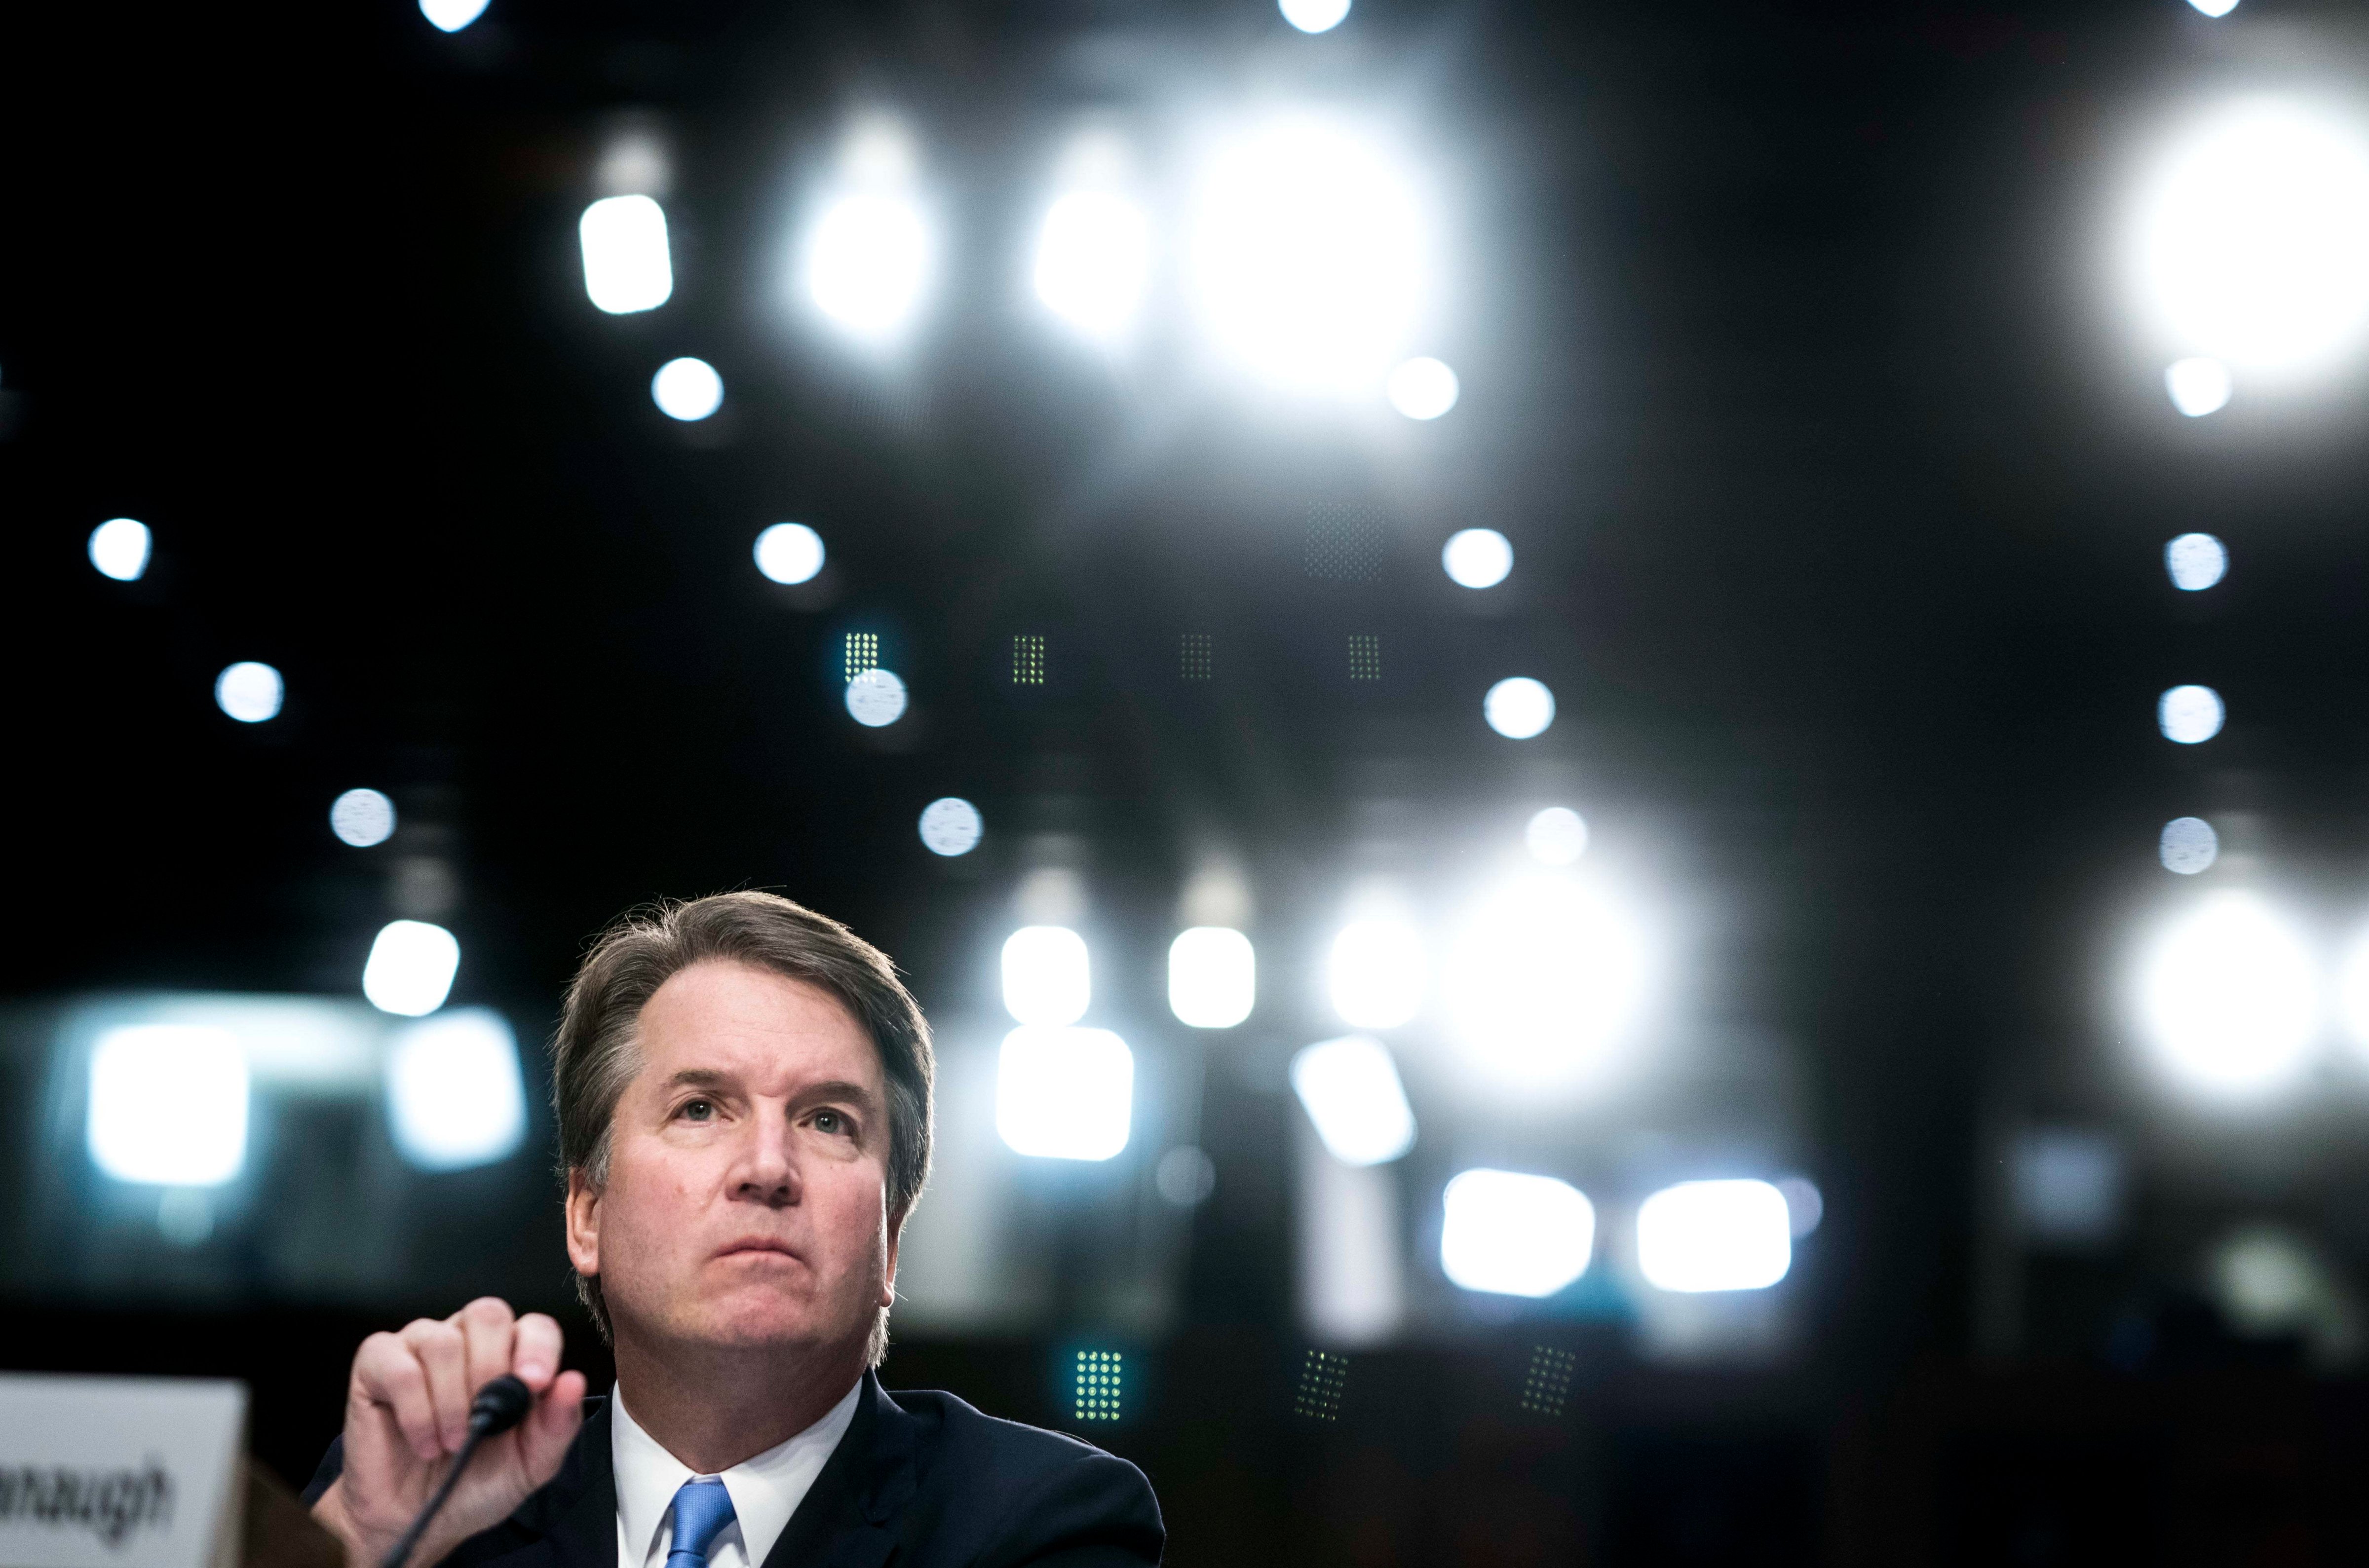 Supreme Court nominee Brett Kavanaugh during his confirmation hearing in the Senate Judiciary Committee on Capitol Hill in Washington, DC on Thursday September 6, 2018. (The Washington Post—The Washington Post/Getty Images)